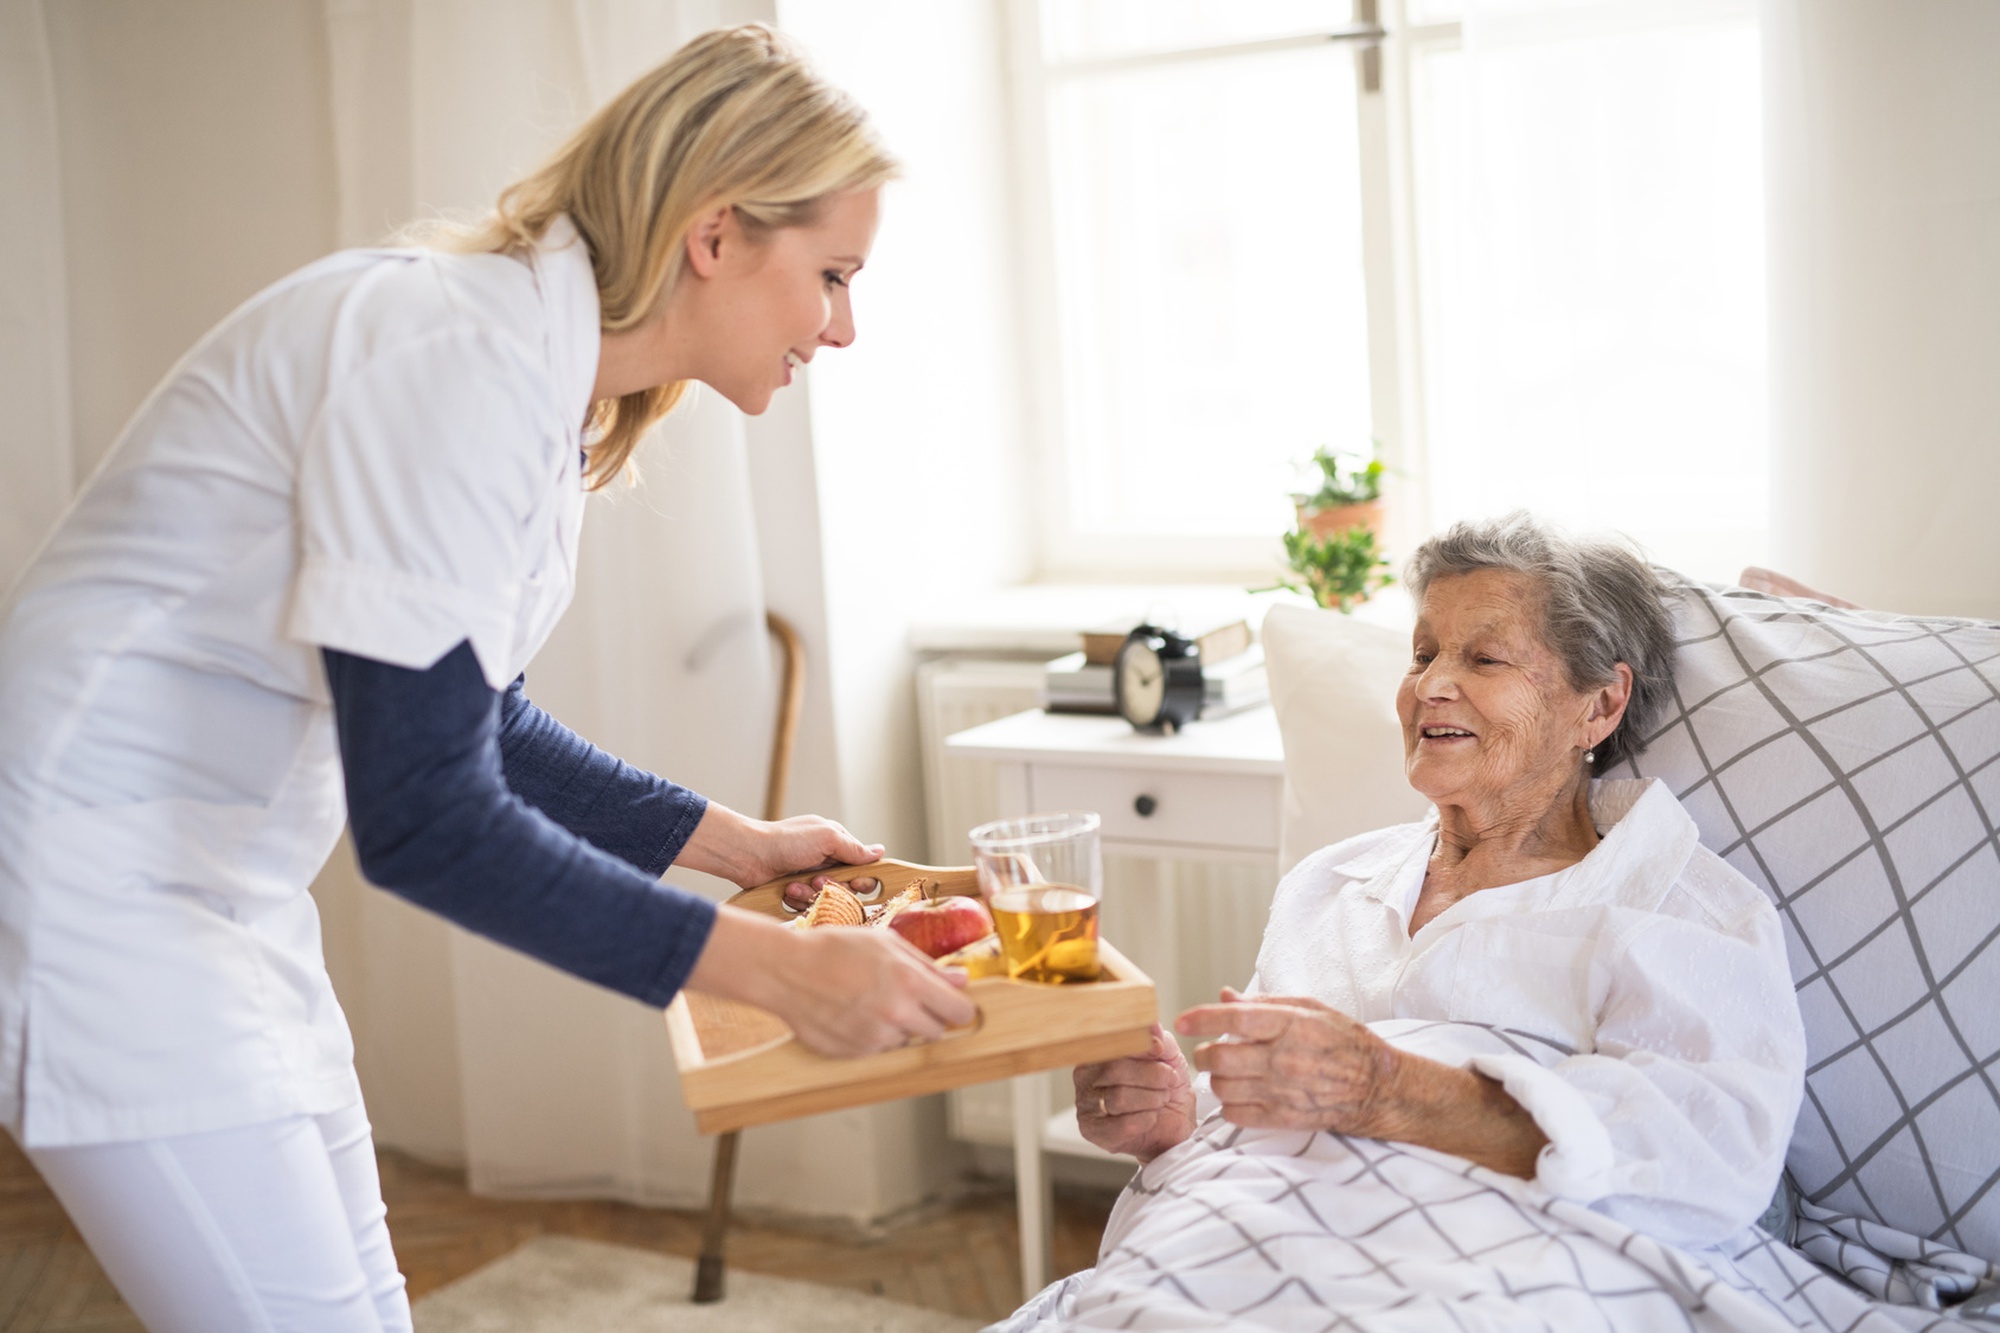 Getting Medical Services At Your Doorstep Via The Provision Of Home Healthcare